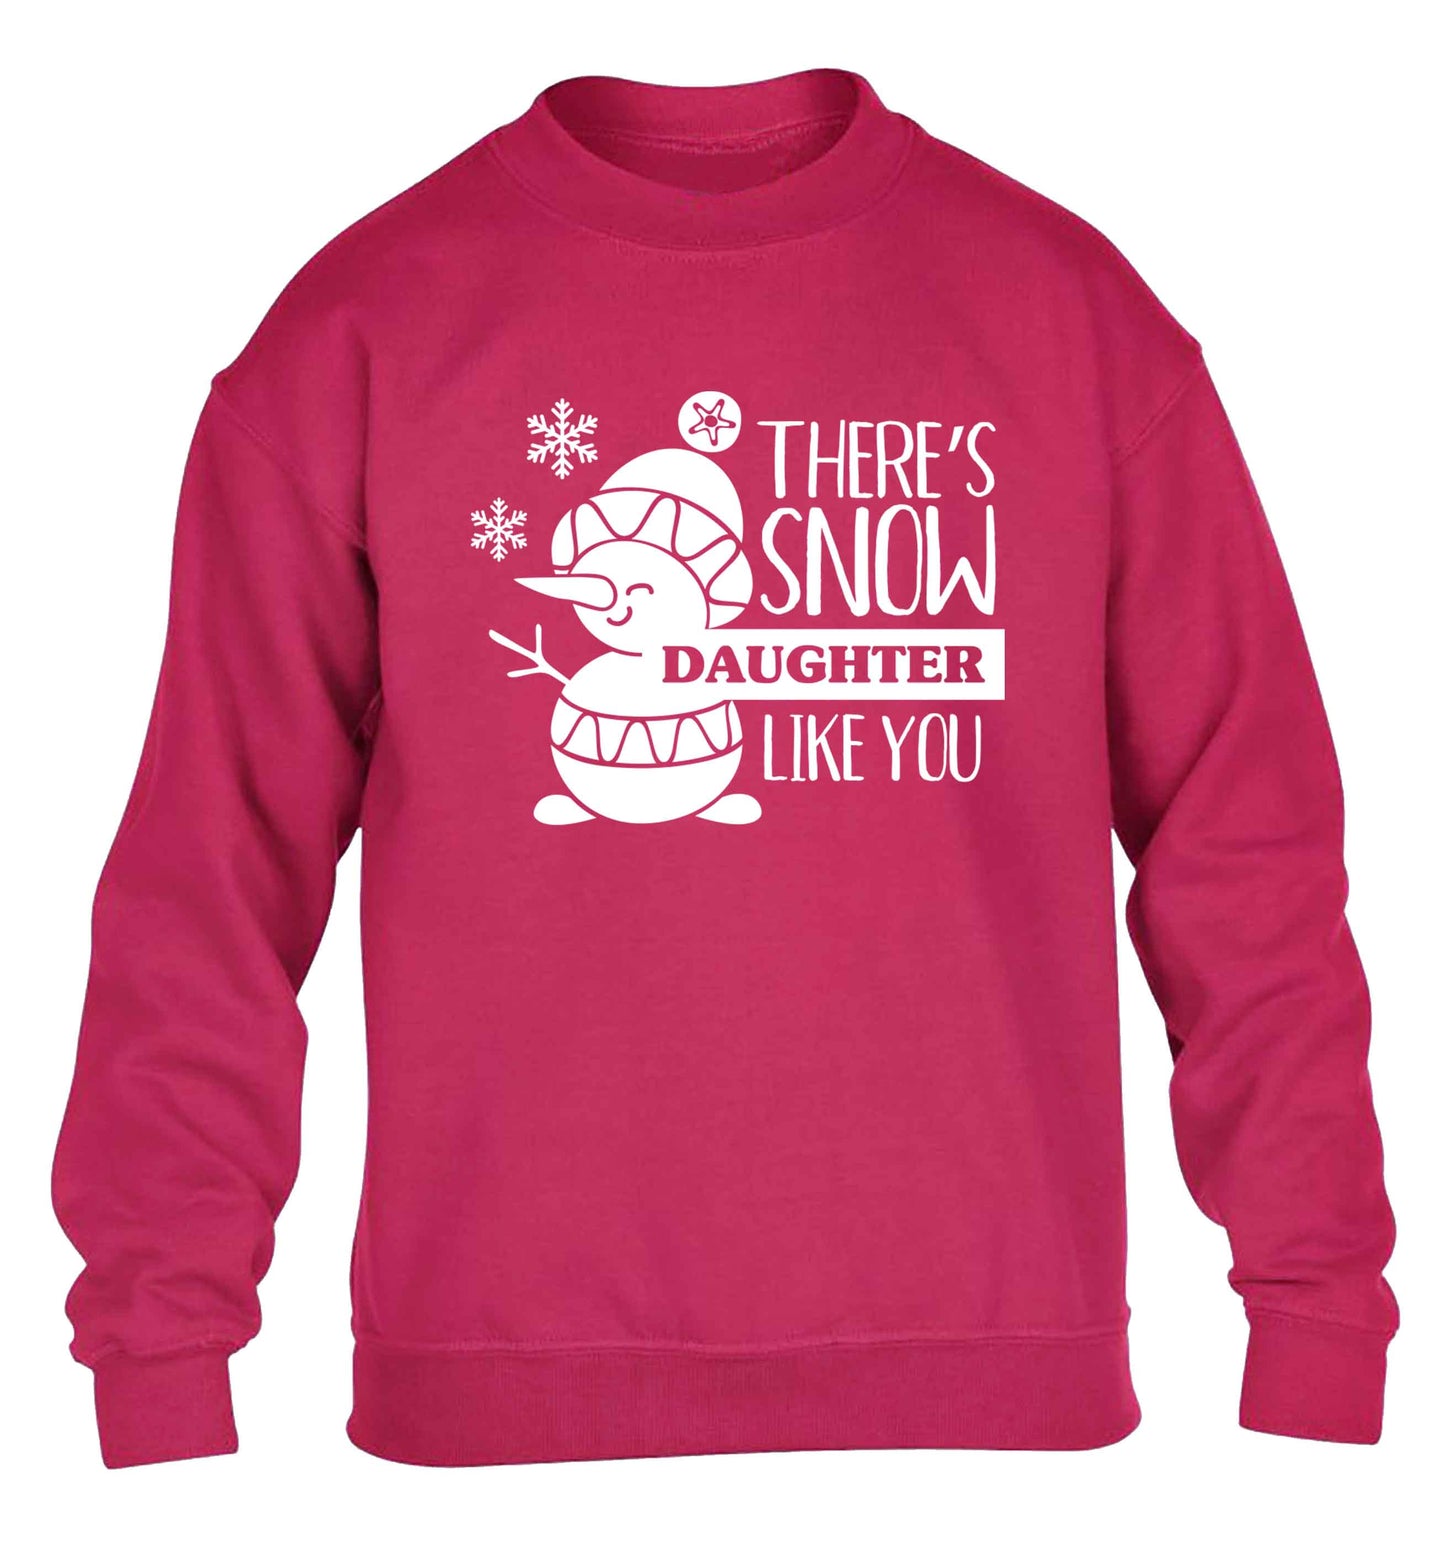 There's snow daughter like you children's pink sweater 12-13 Years